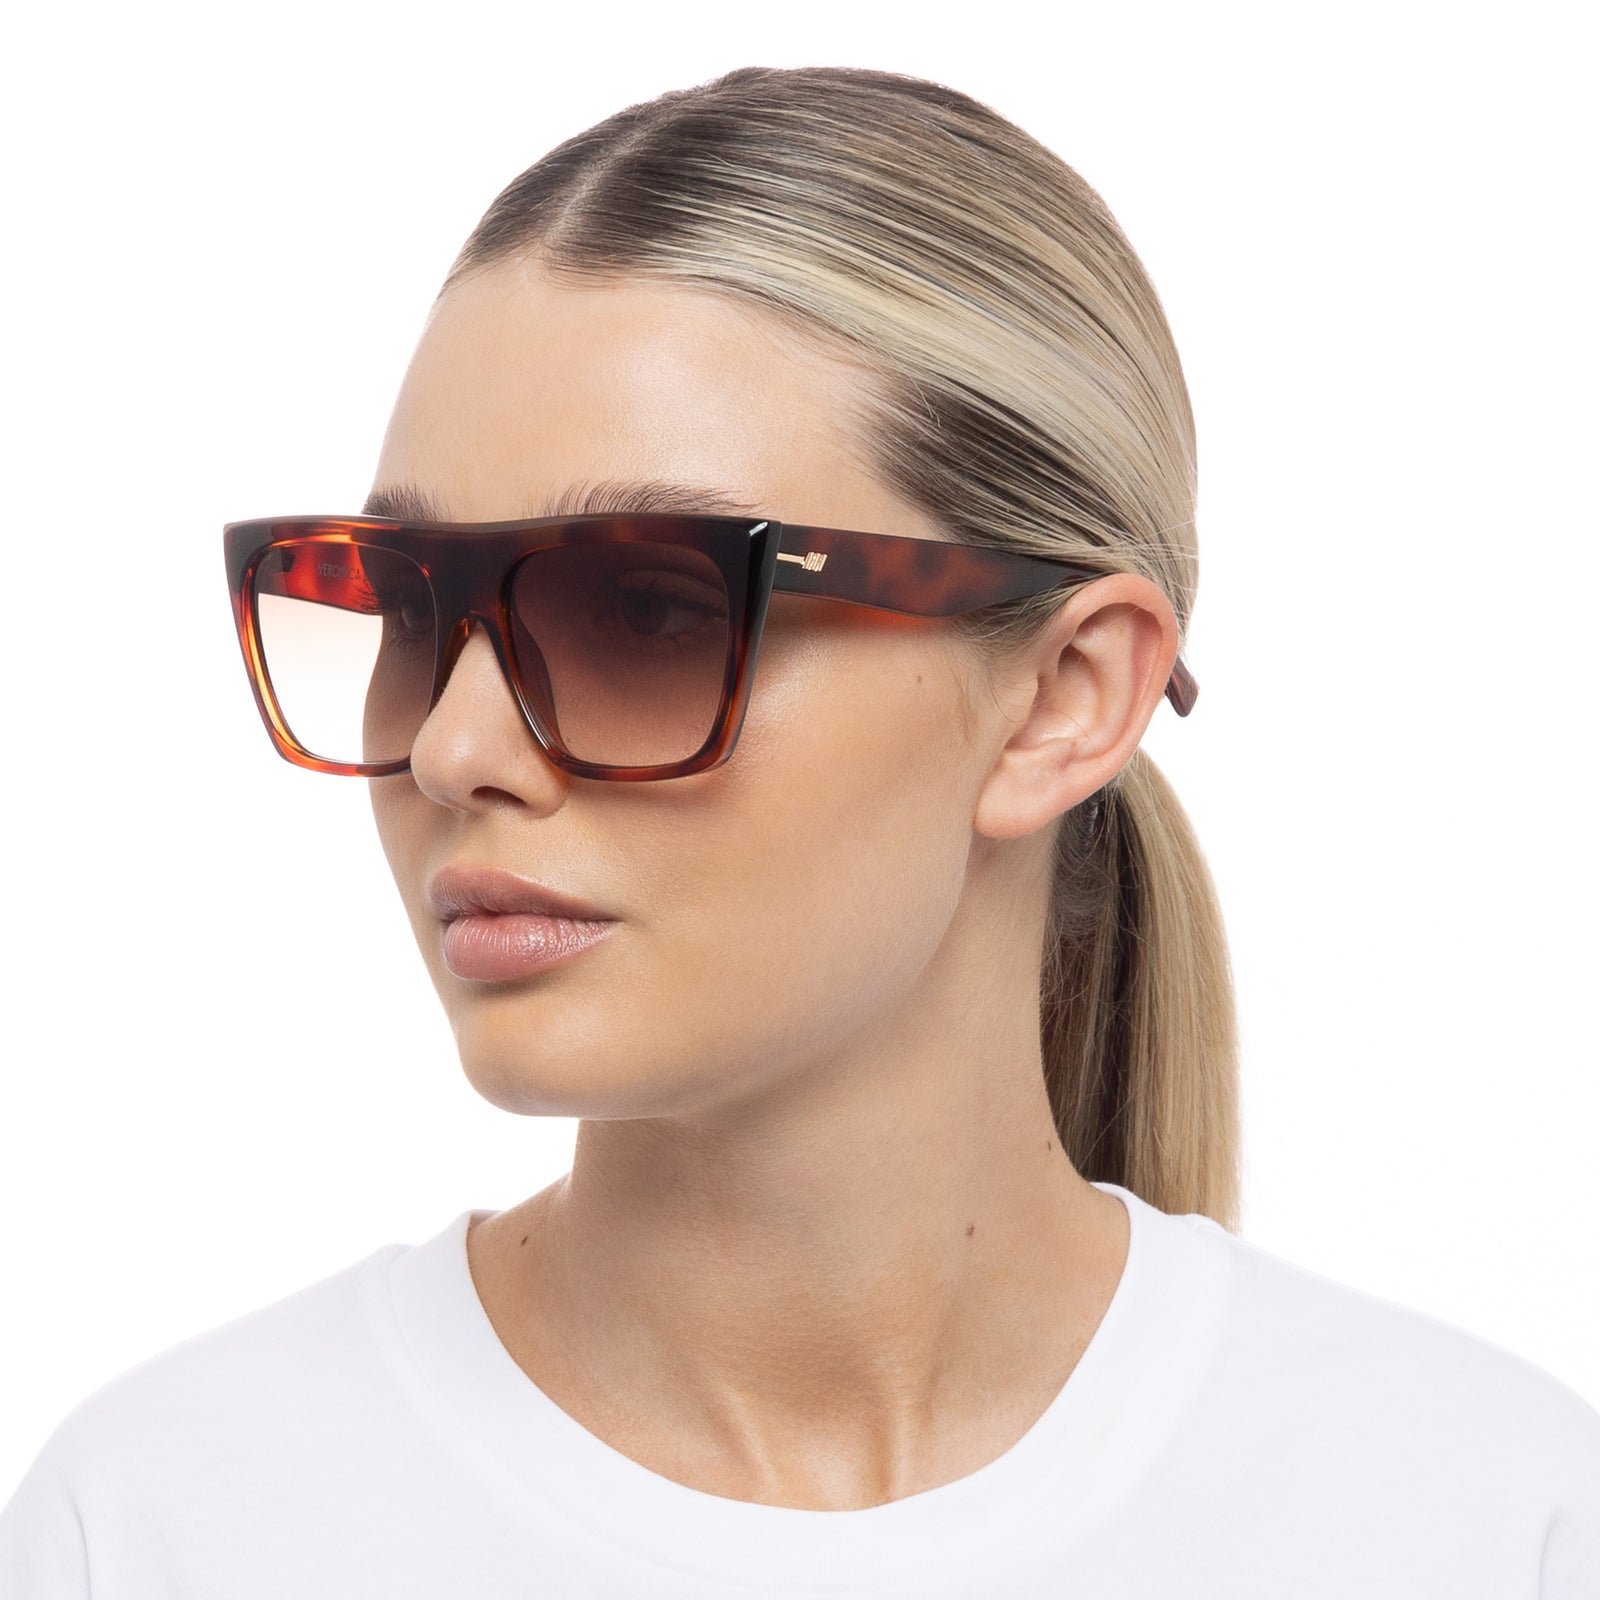 Le Specs - The Thirst Exclusive, D-Frame Women's Sunglasses, Tortoise-Shell, Large